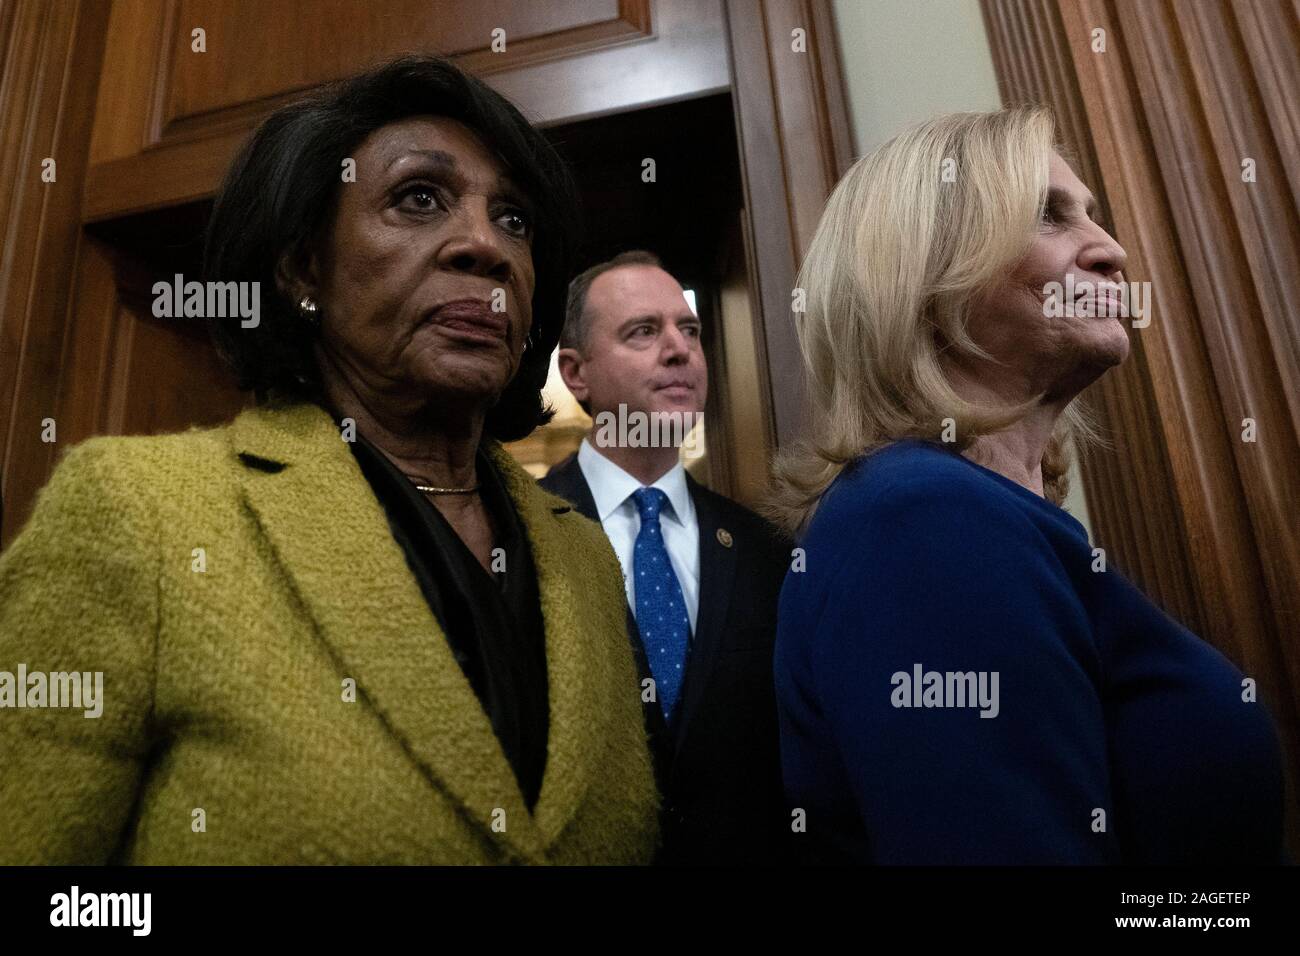 Washington, DC, USA. 18th Dec, 2019. From left to right: United States Representative Maxine Waters (Democrat of California), United States Representative Adam Schiff (Democrat of California), and United States Representative Carolyn Maloney (Democrat of New York), United States enter a press conference after the United States House of Representatives voted to impeach United States President Donald J. Trump at the United States Capitol in Washington, DC, U.S., on Wednesday, December 18, 2019. Credit: Stefani Reynolds/CNP | usage worldwide Credit: dpa/Alamy Live News Stock Photo